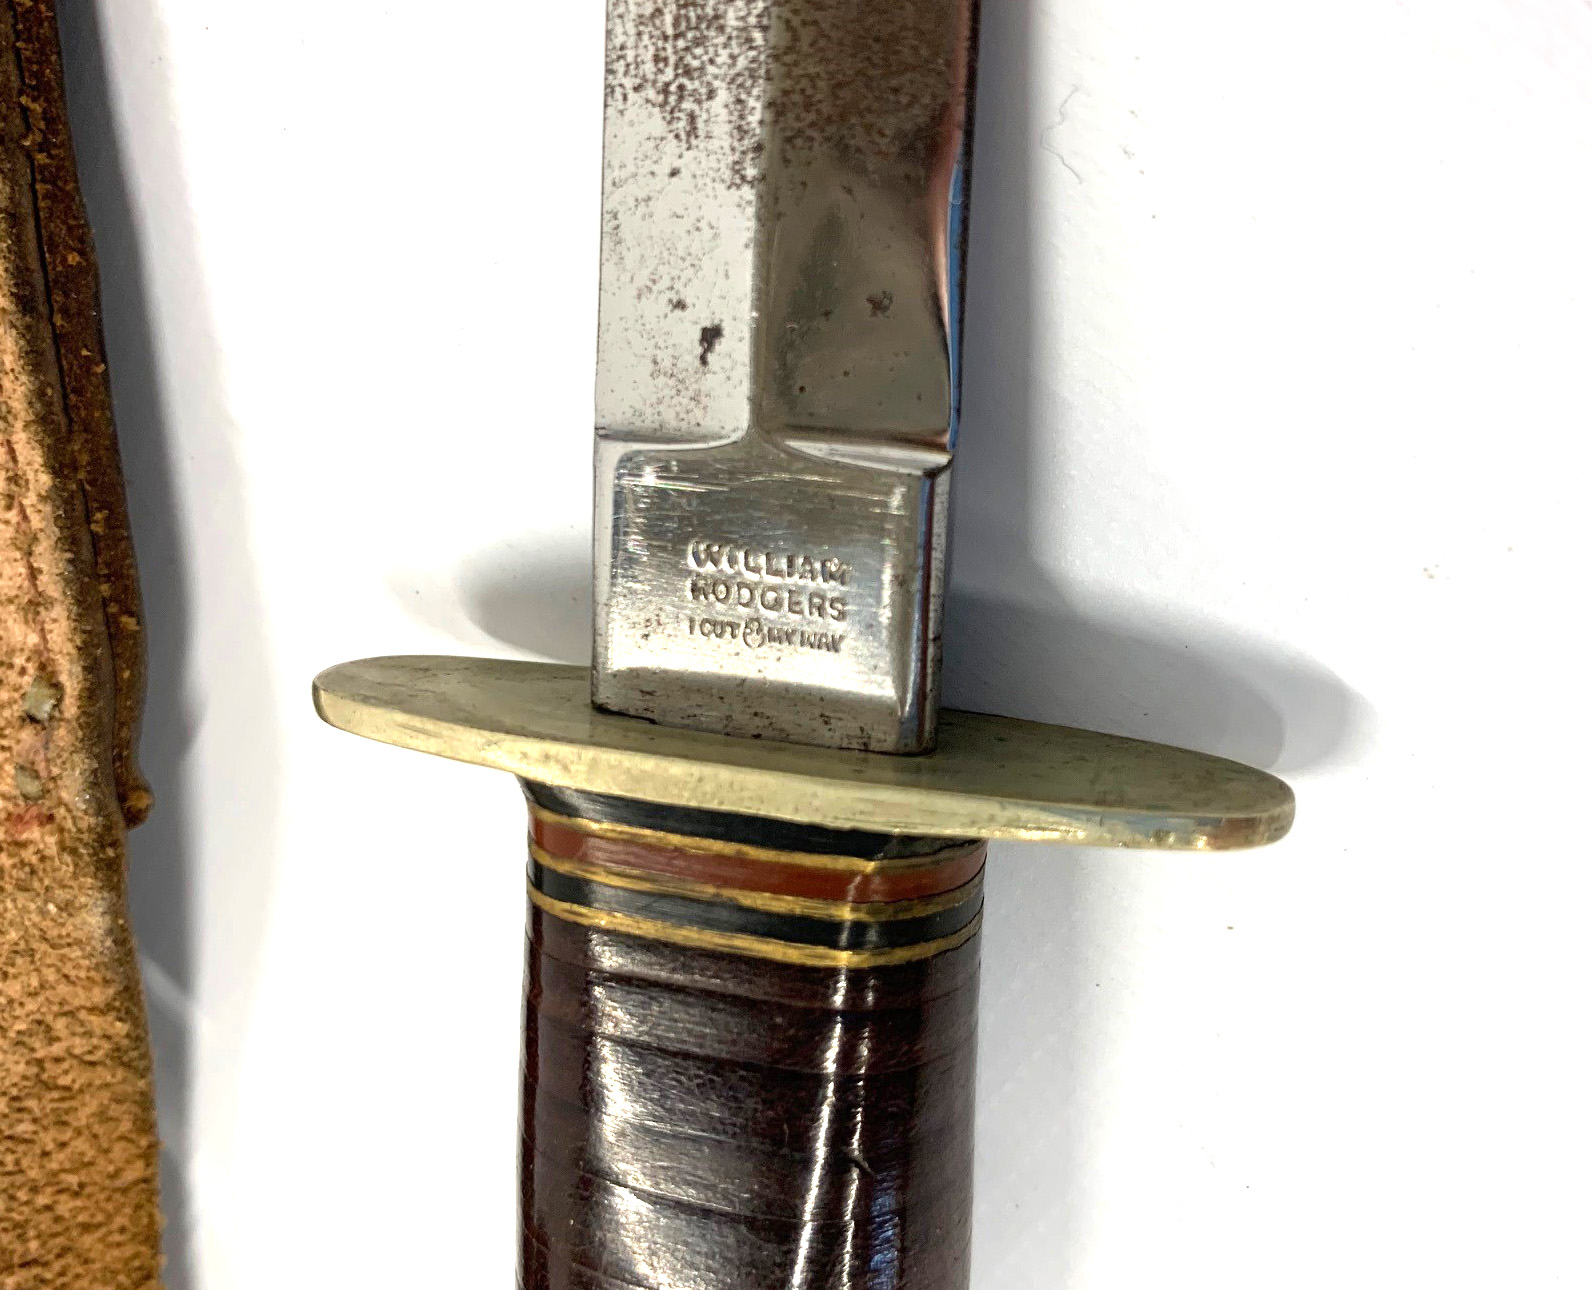 A 20TH CENTURY WILLIAM RODGERS DAGGER Inscribed to blade 'I CUT MY WAY - WILLIAM RODGERS, SHEFFIELD, - Image 3 of 4